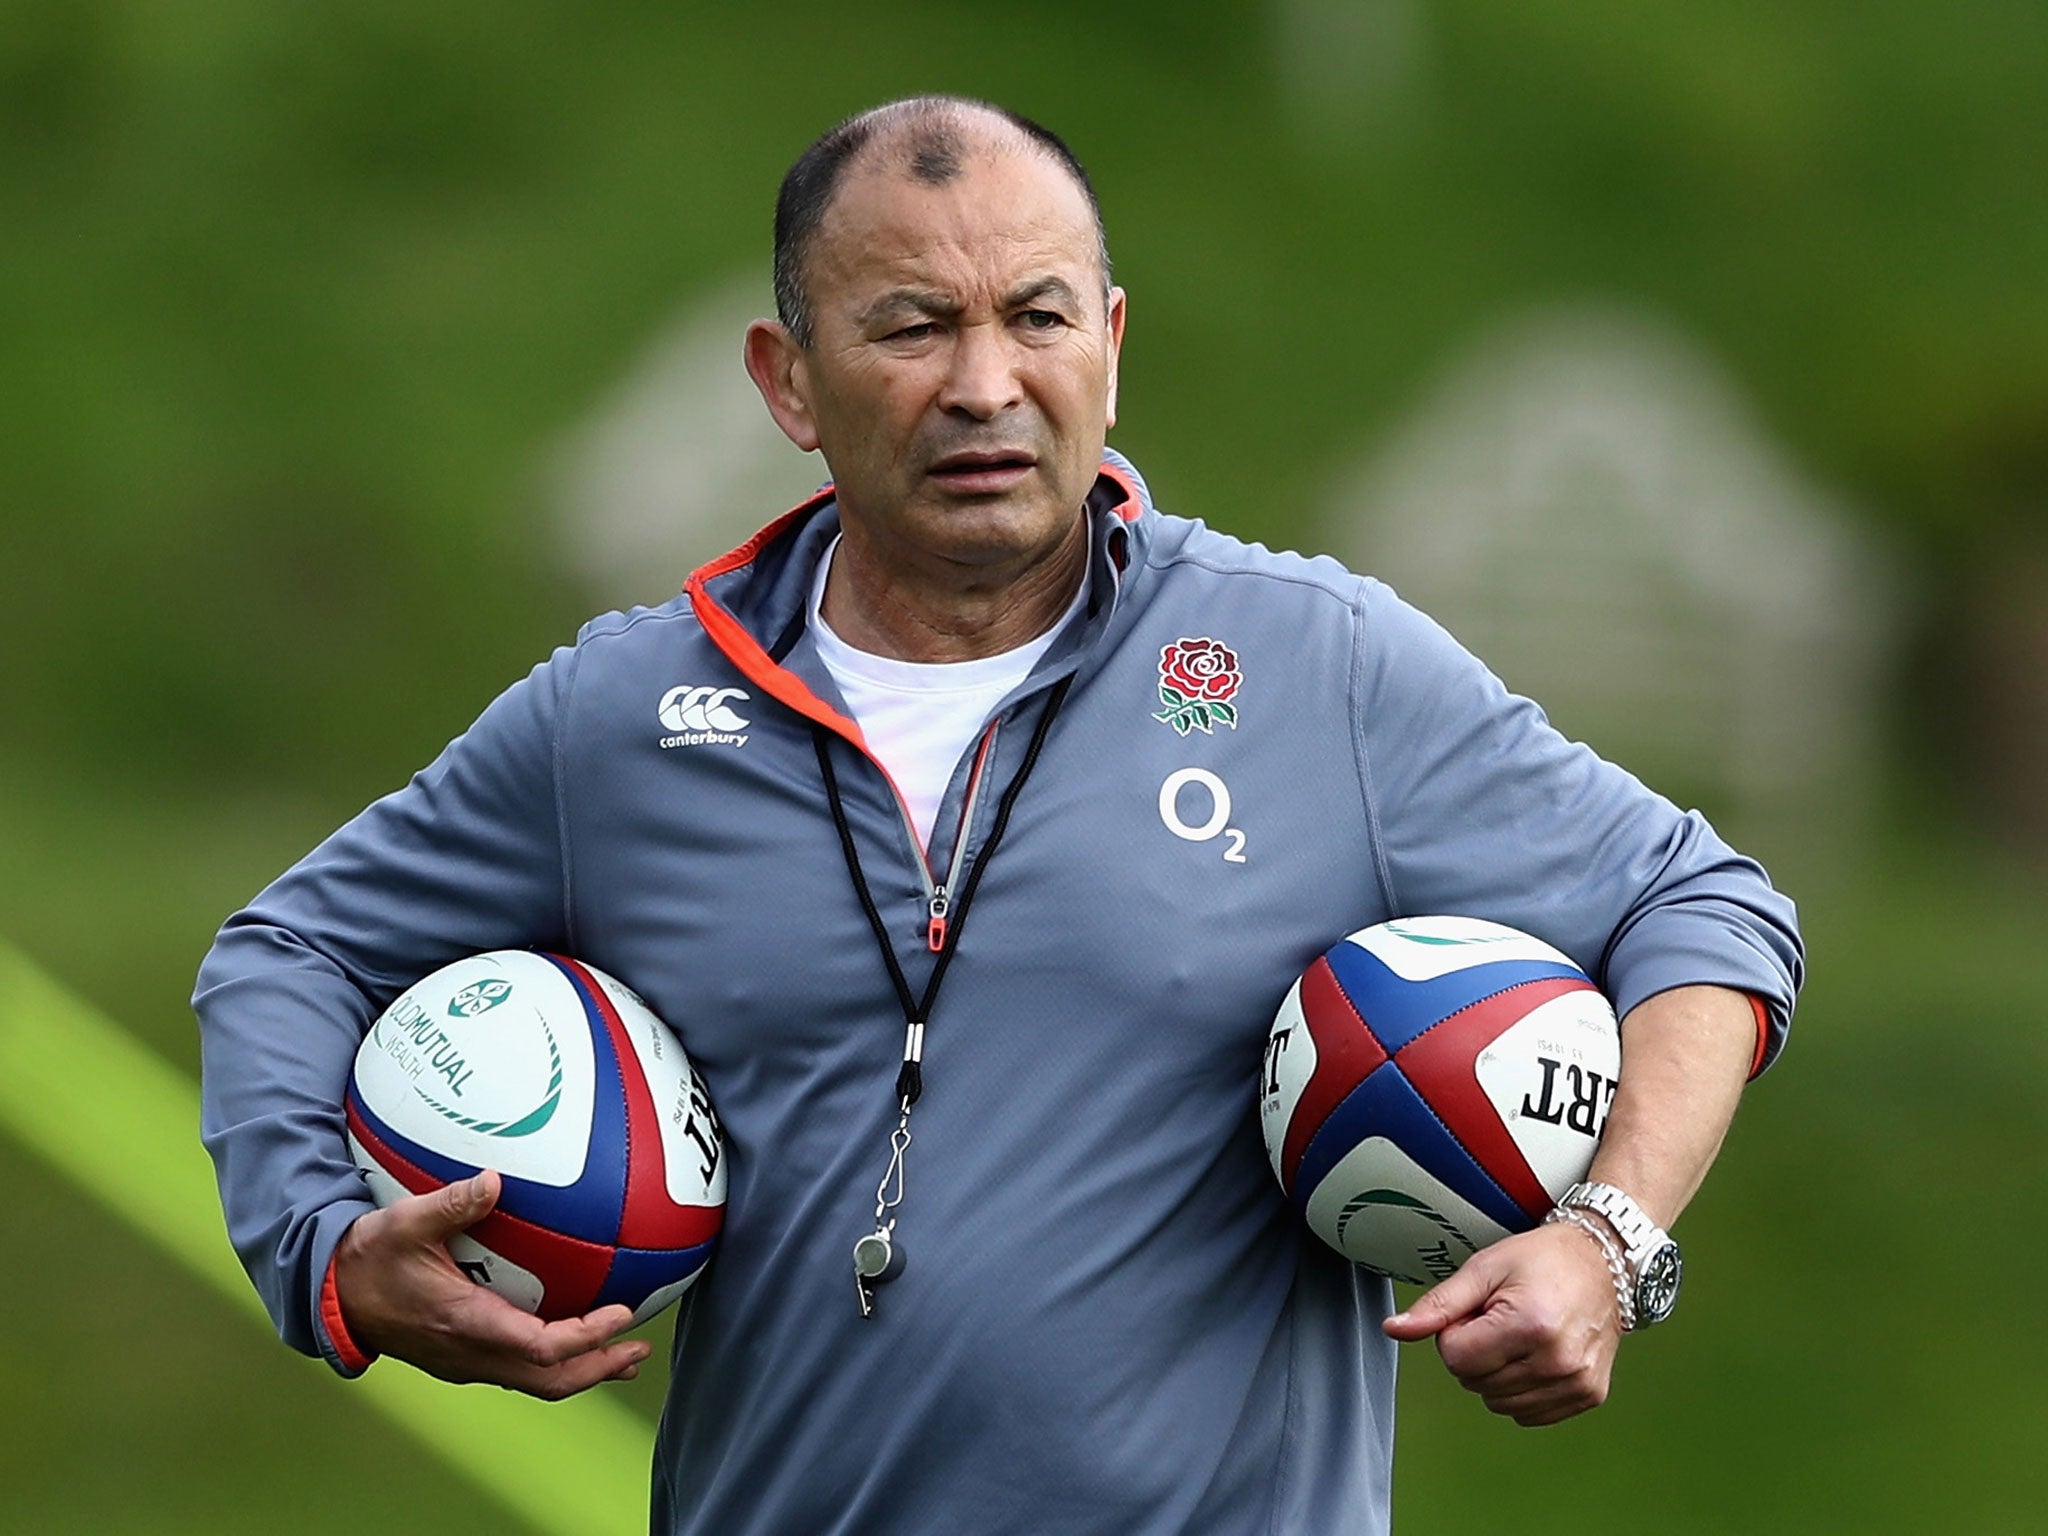 Eddie Jones is free to select any player eligible to play for England